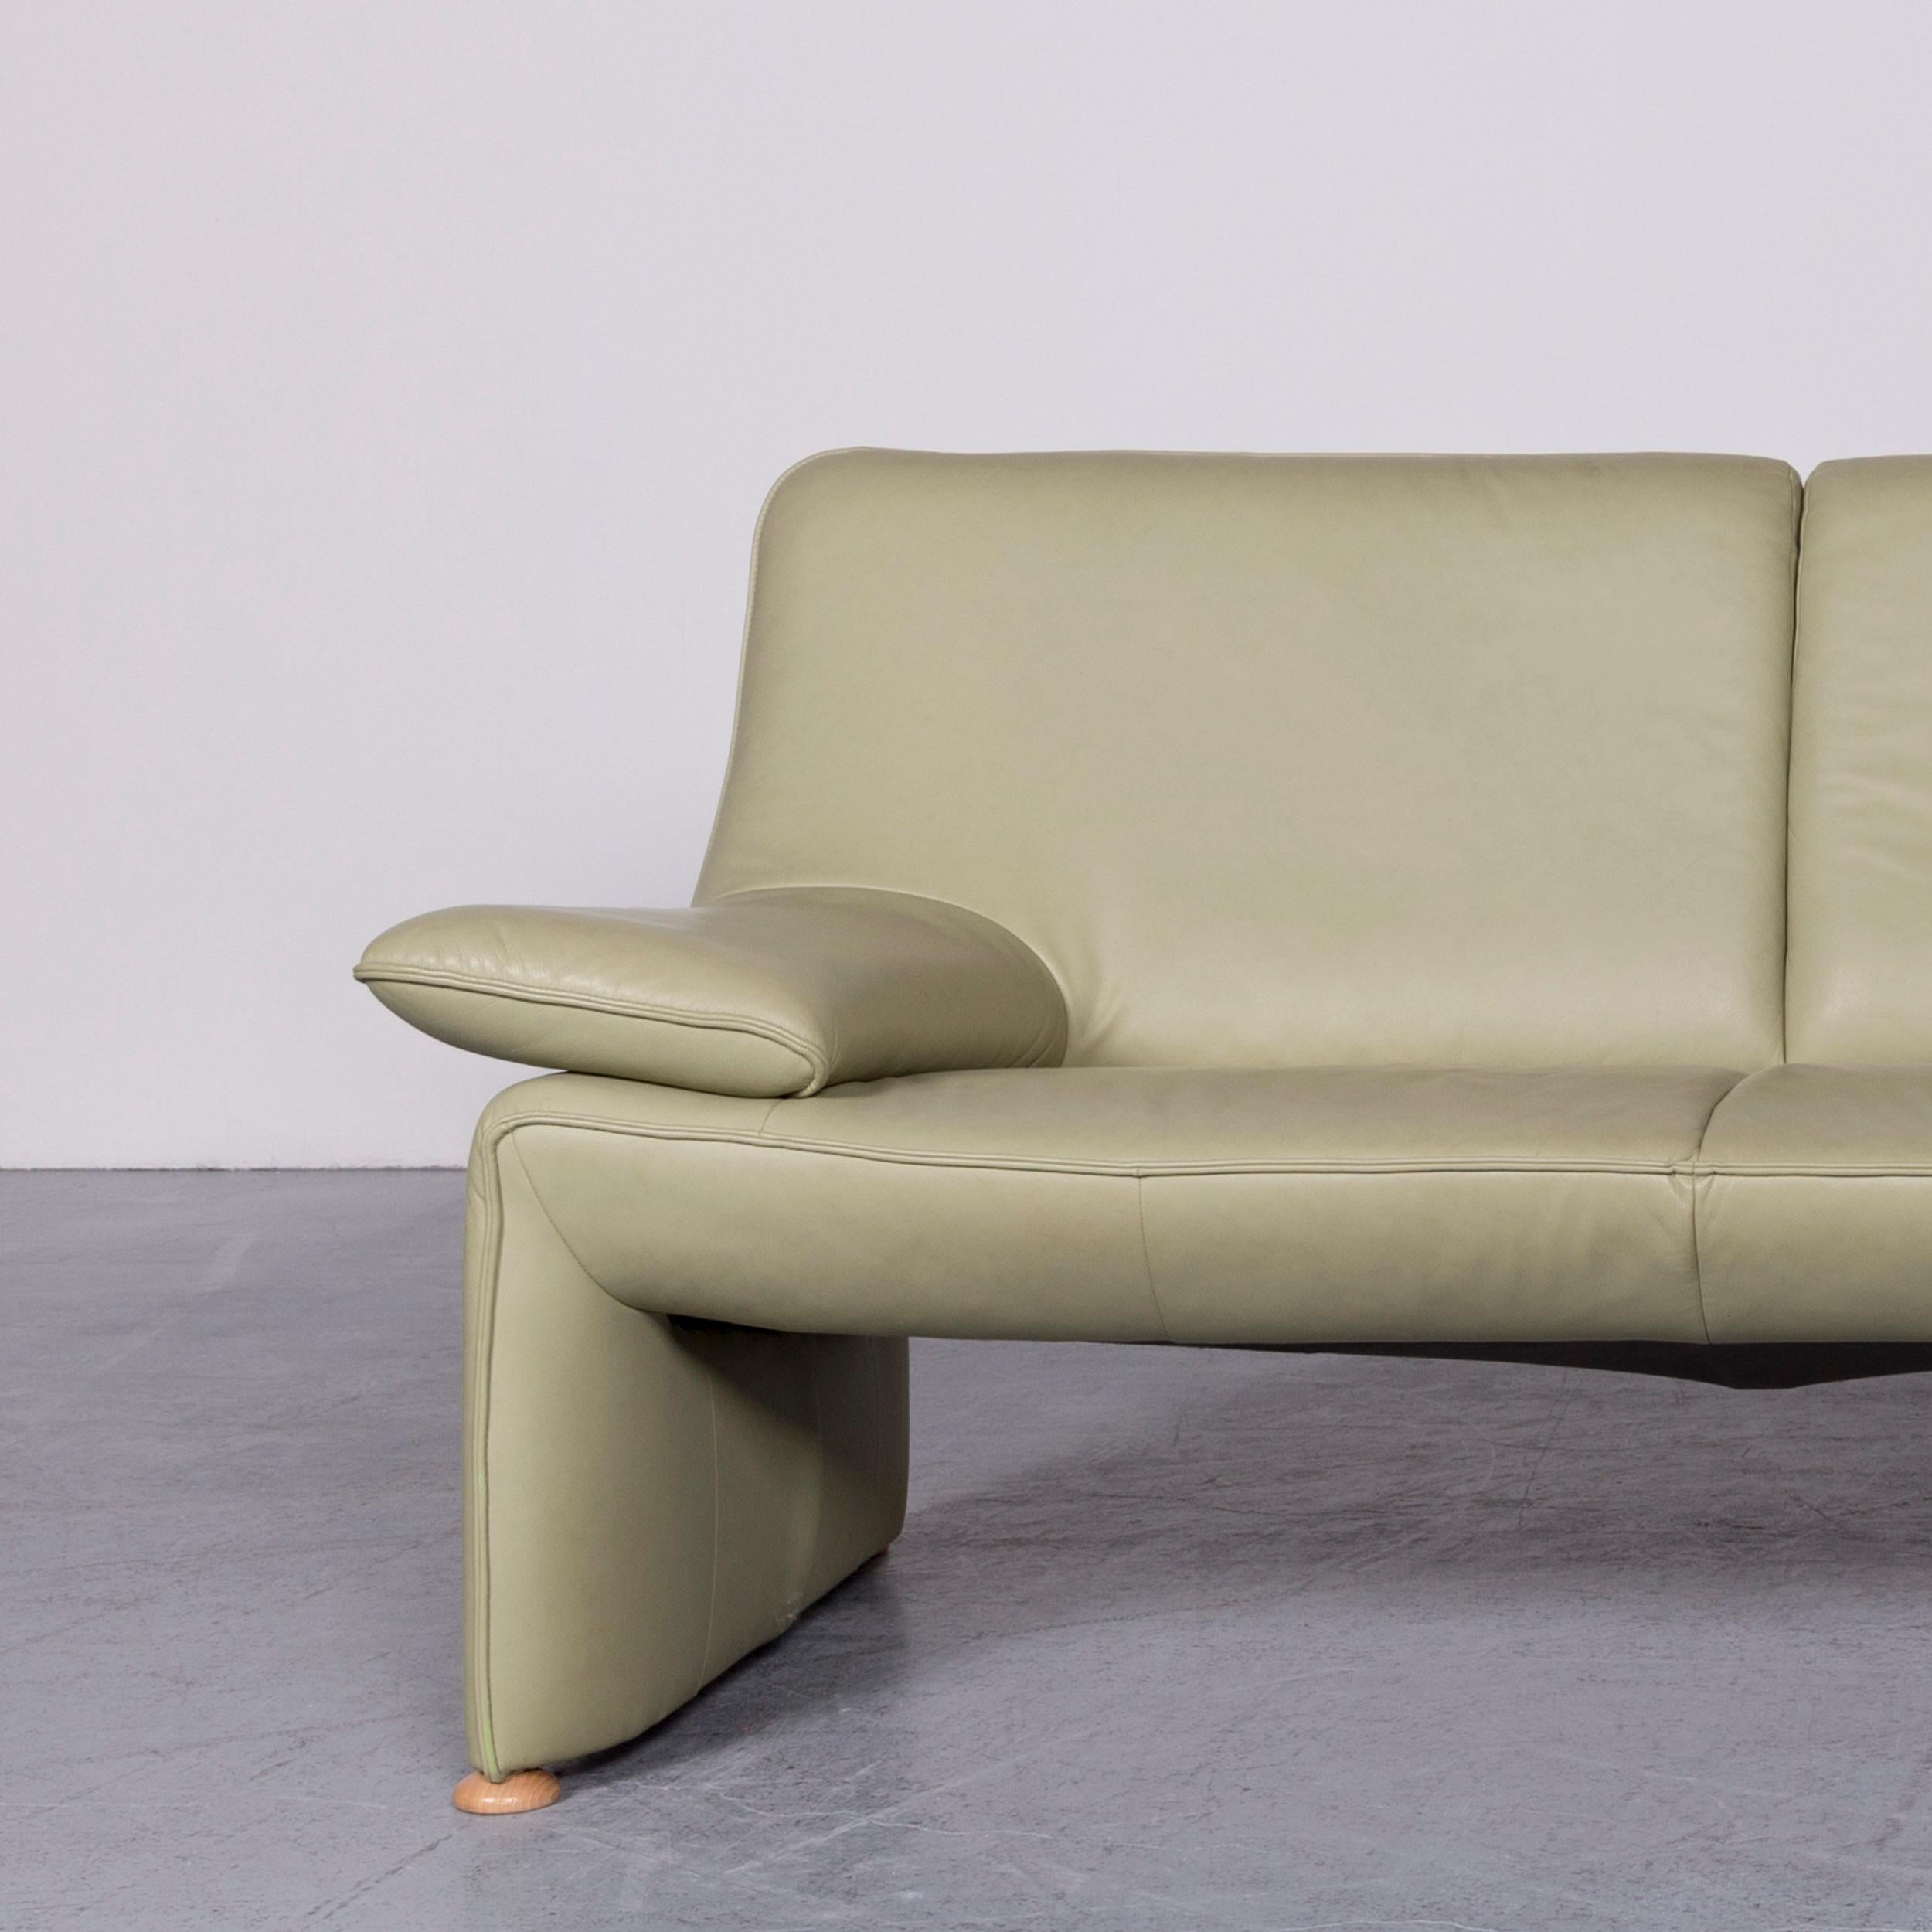 Laauser Flair Designer Sofa Leather Green Two-Seat Couch Modern In Good Condition For Sale In Cologne, DE